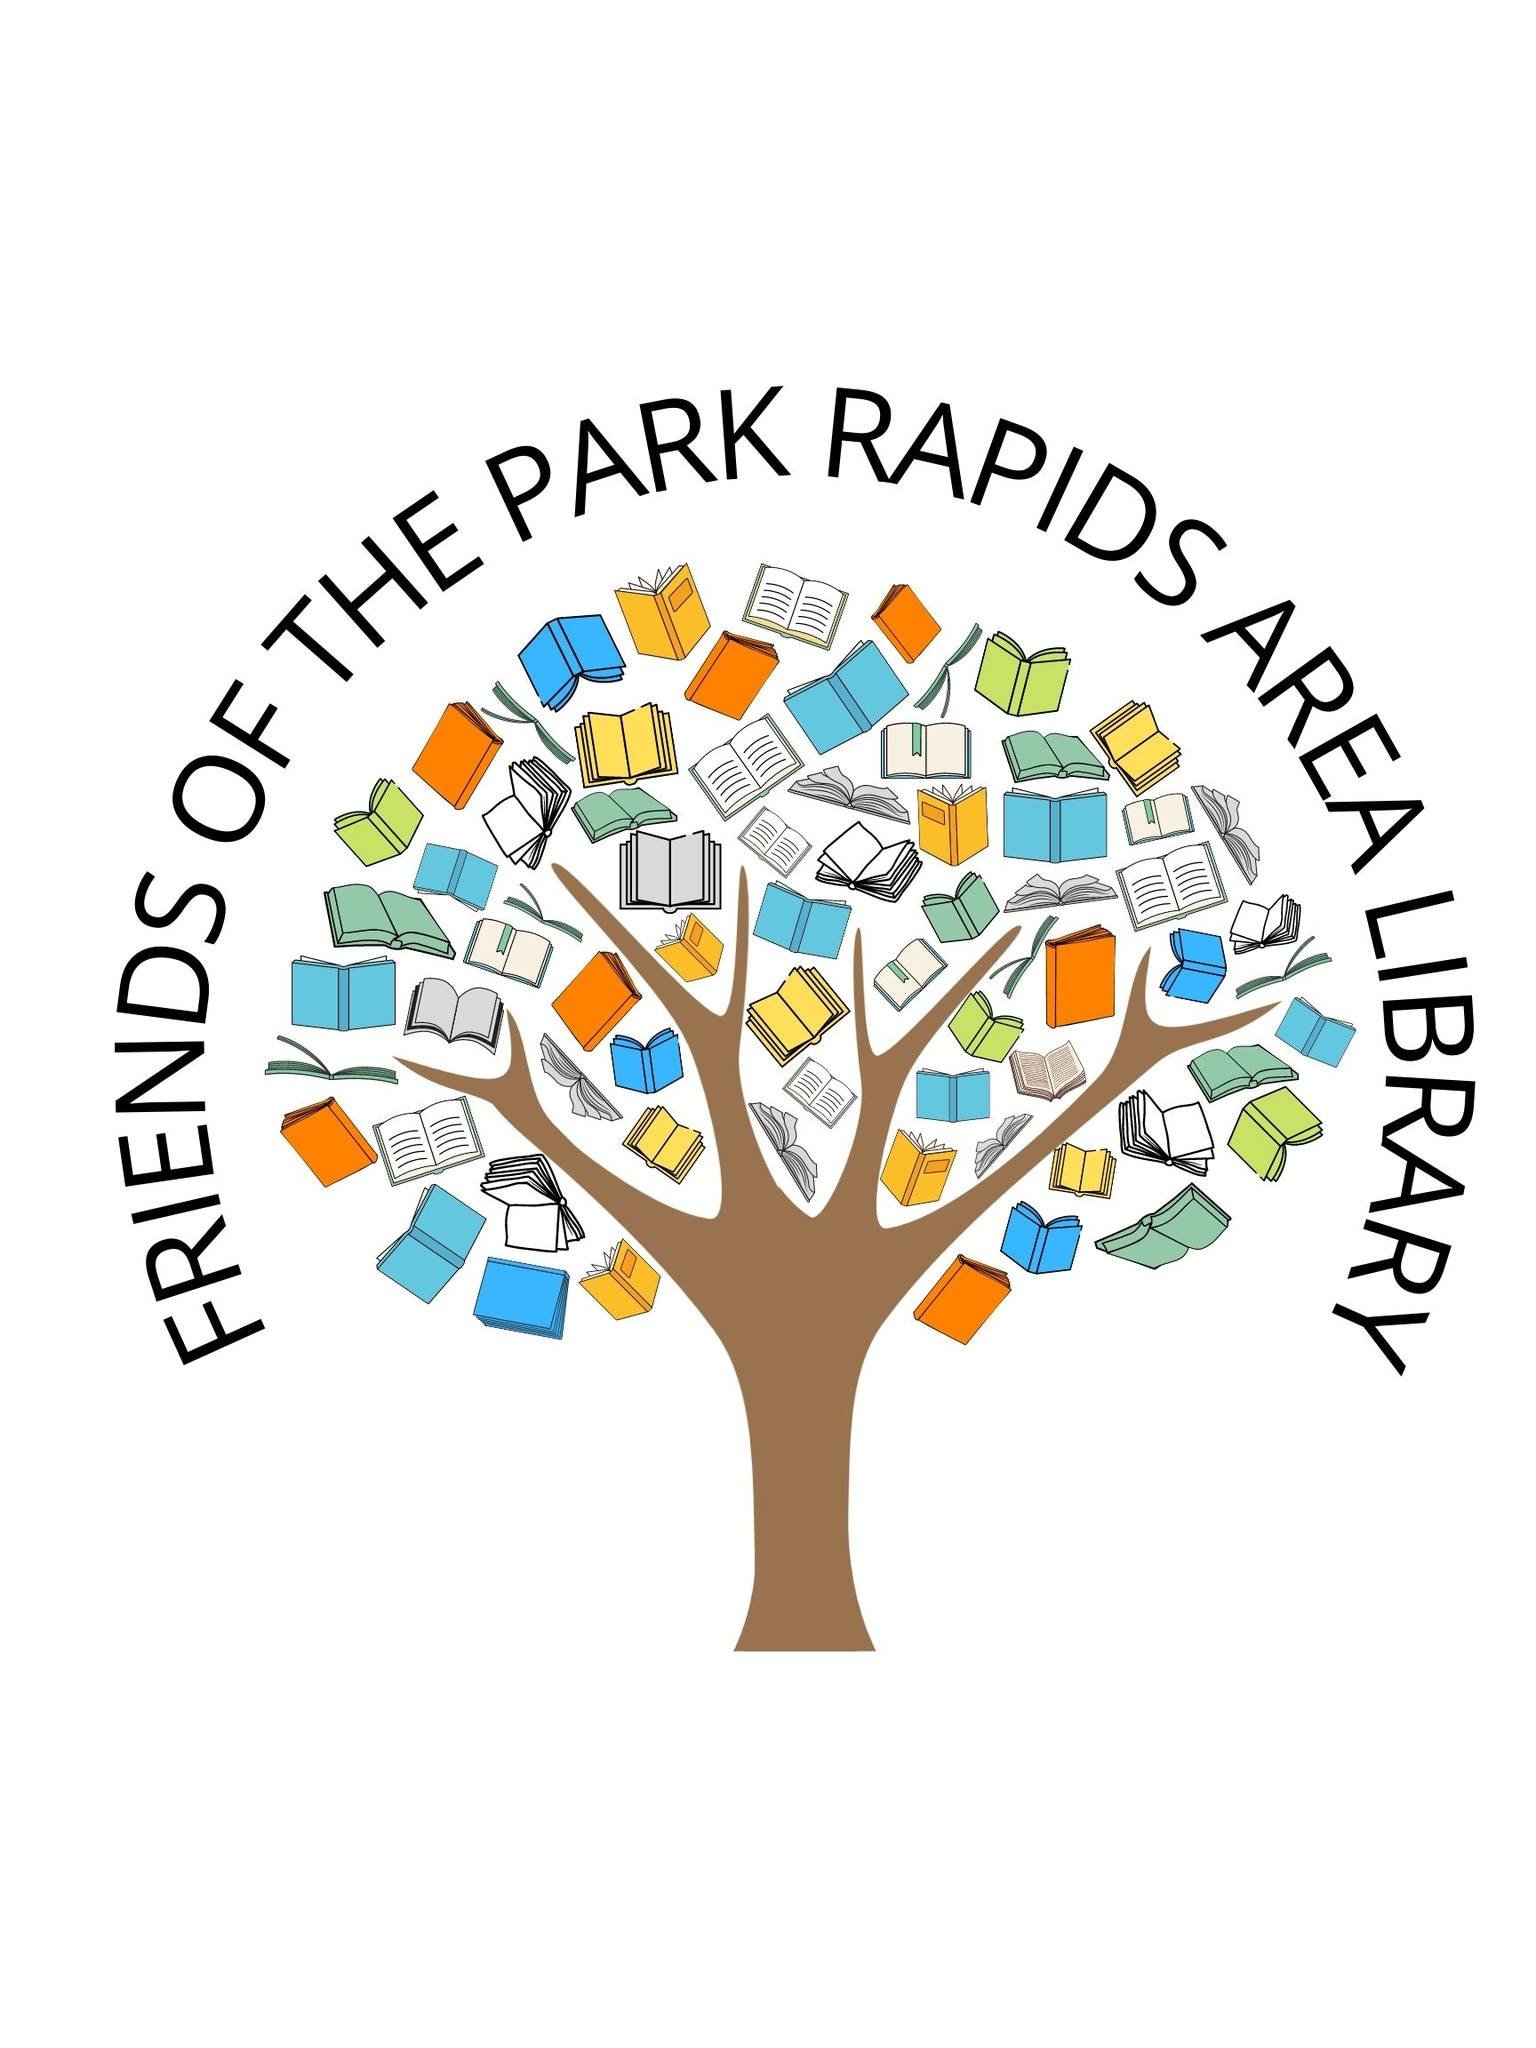 Tree with books for leaves with the words 'Friends of the Park Rapids Area Library'